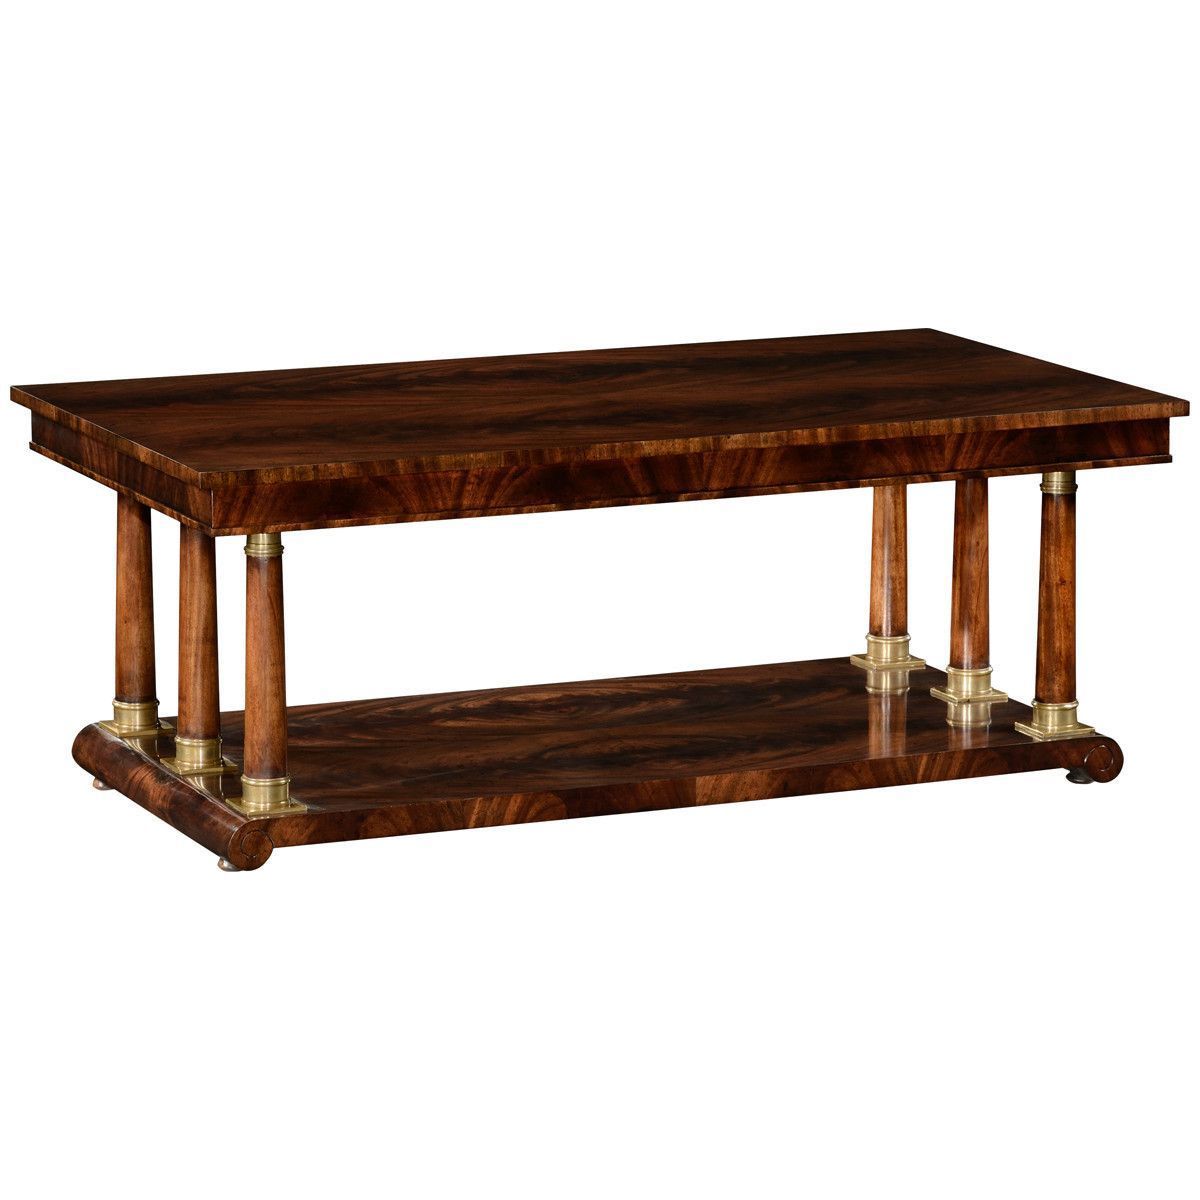 Jonathan Charles Mahogany Biedermeier Style Rectangular Coffee Table Pertaining To Rectangular Coffee Tables With Pedestal Bases (Gallery 17 of 20)